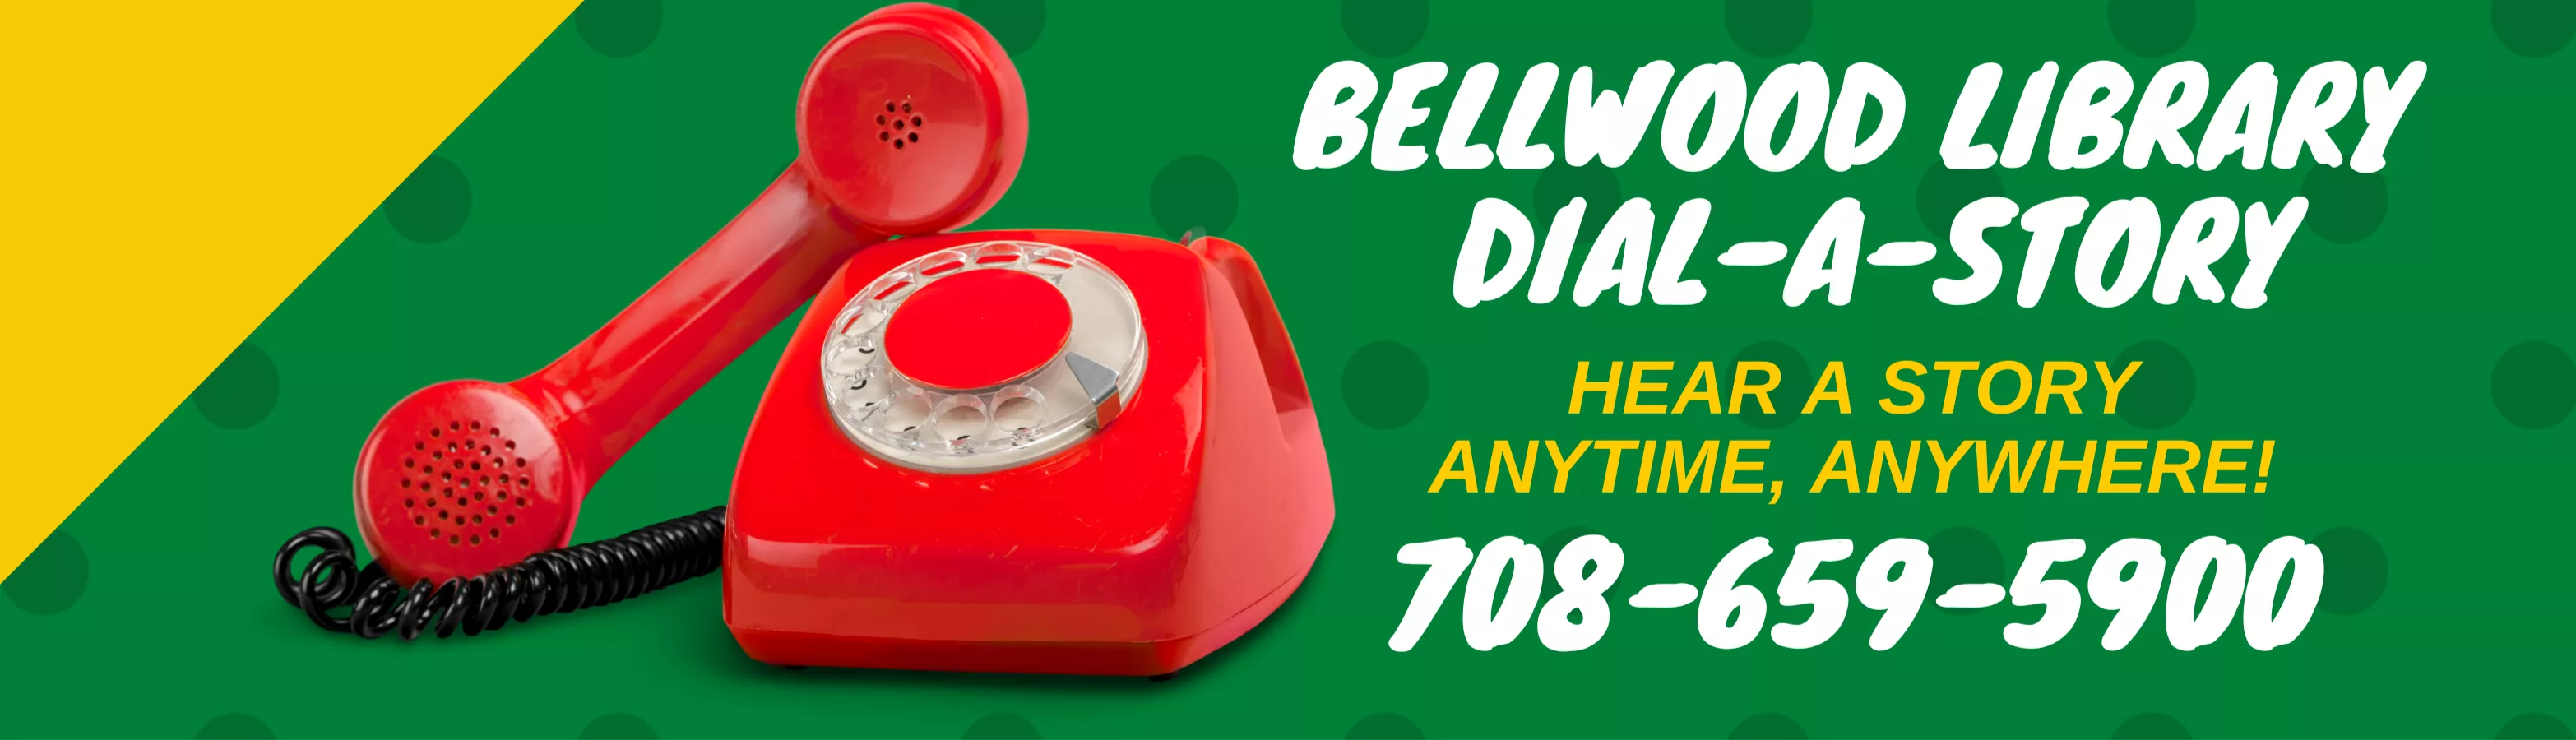 a green background with a red phone image and the text Bellwood Library Dial A Story 708-659-5900